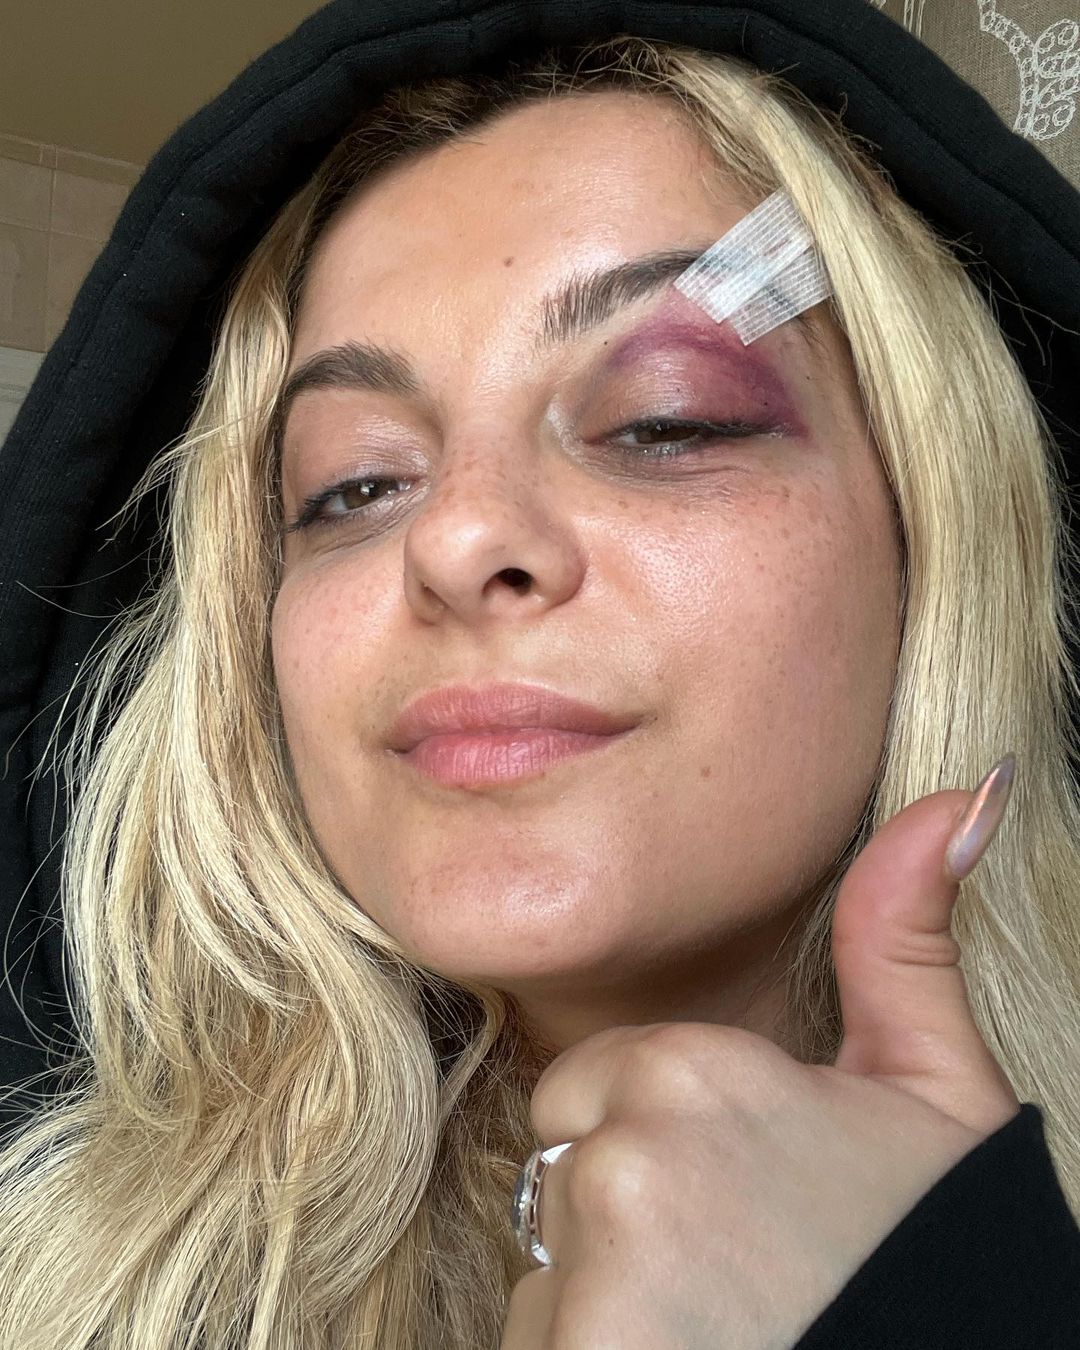 Bebe Rexha'S Concert: A Fan'S 'Funny' Act Turns Into A Serious Safety Concern 1